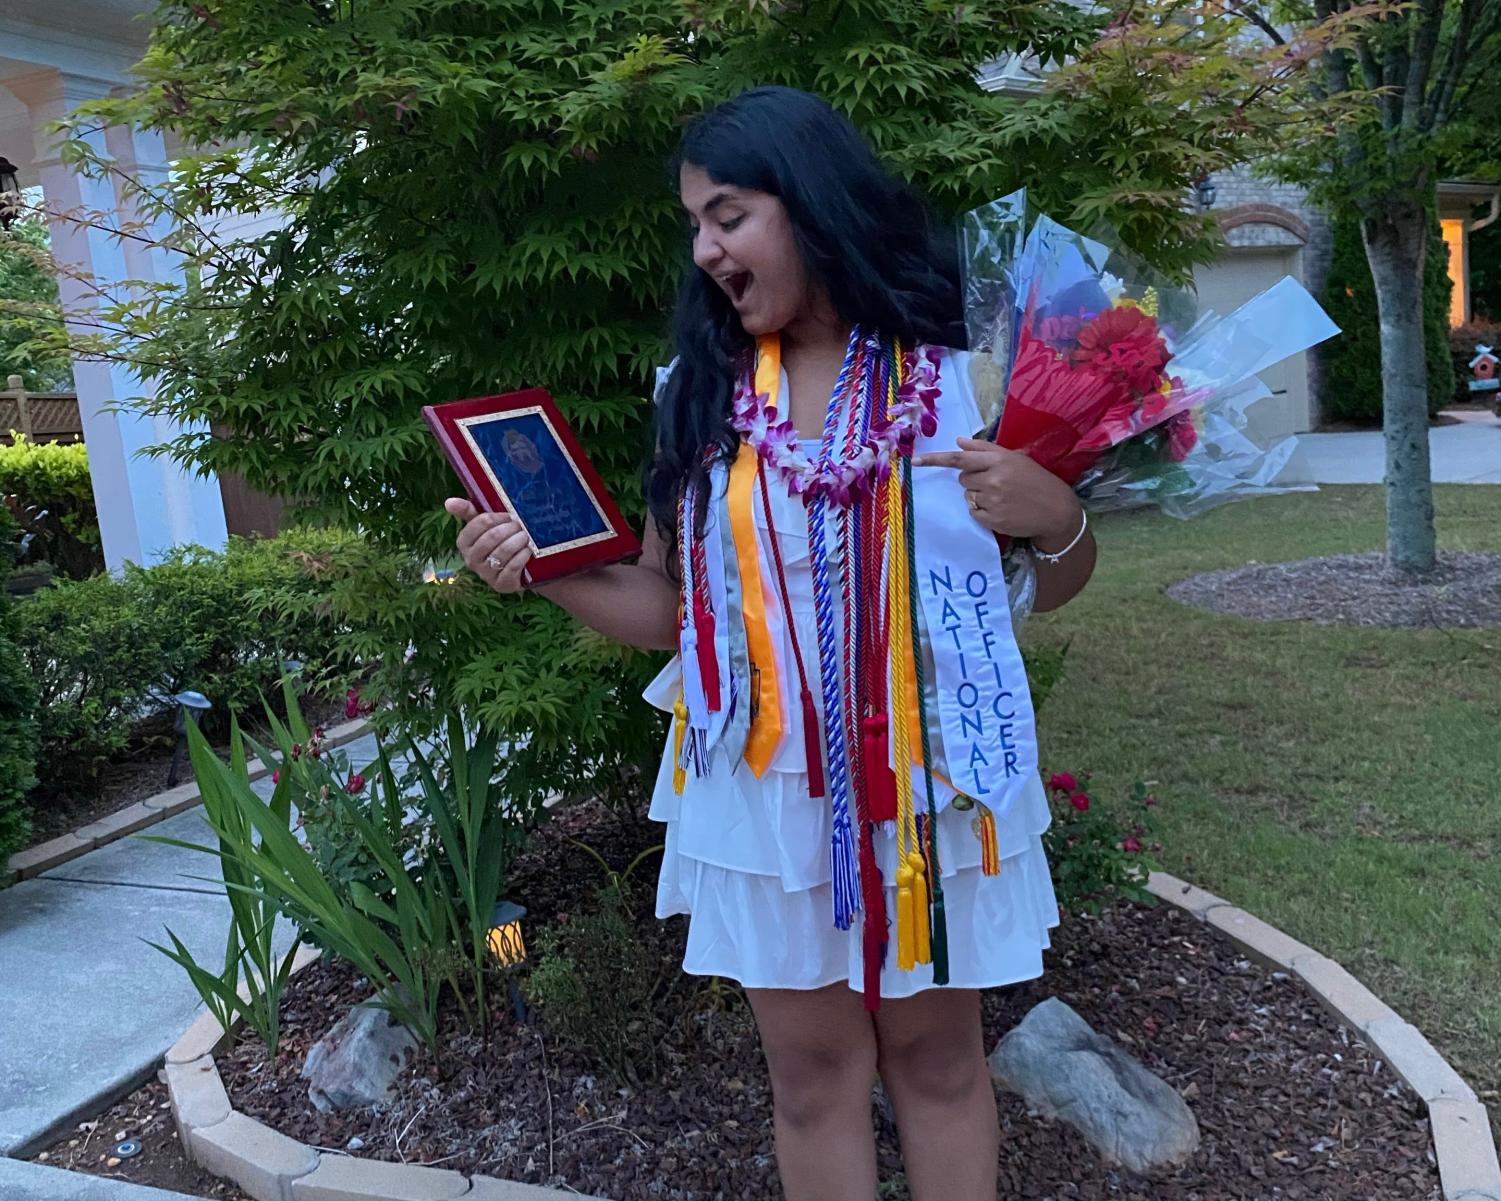 Sharma after her graduation ceremony, decked out in cords and holding her Principals Award.